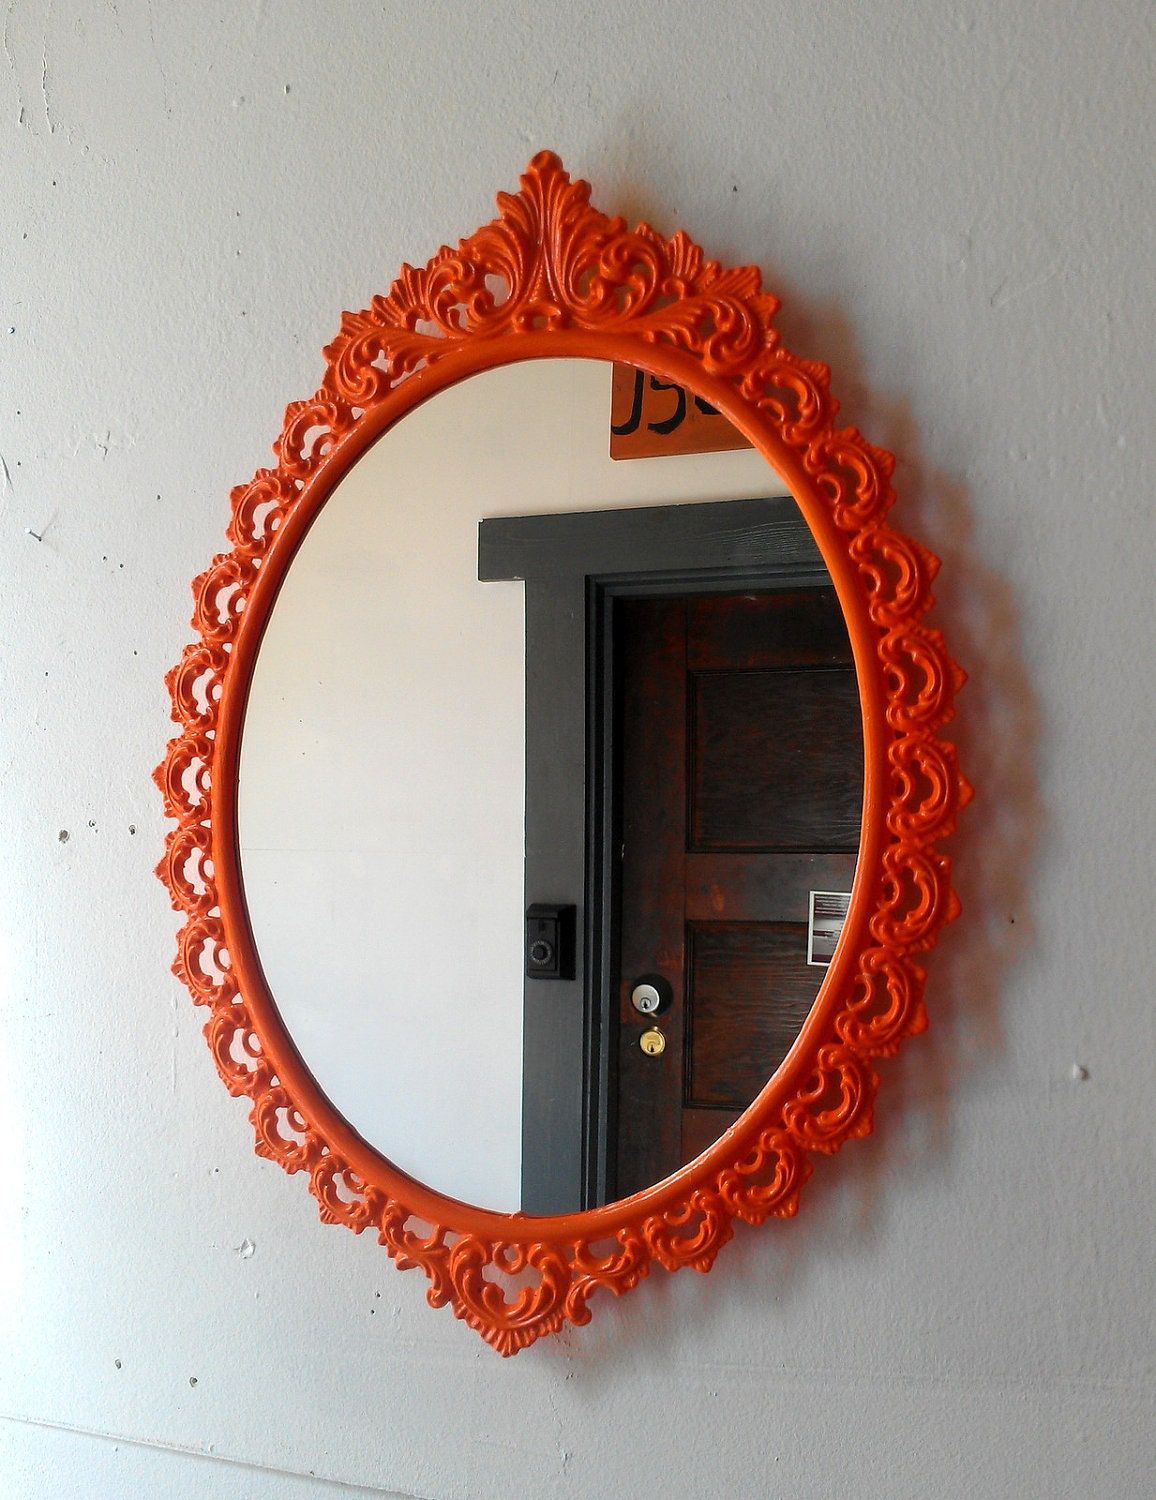 Oval Wall Mirror In Vintage Metal Frame 15 X 11 Inch With Oval Wide Lip Wall Mirrors (View 2 of 15)